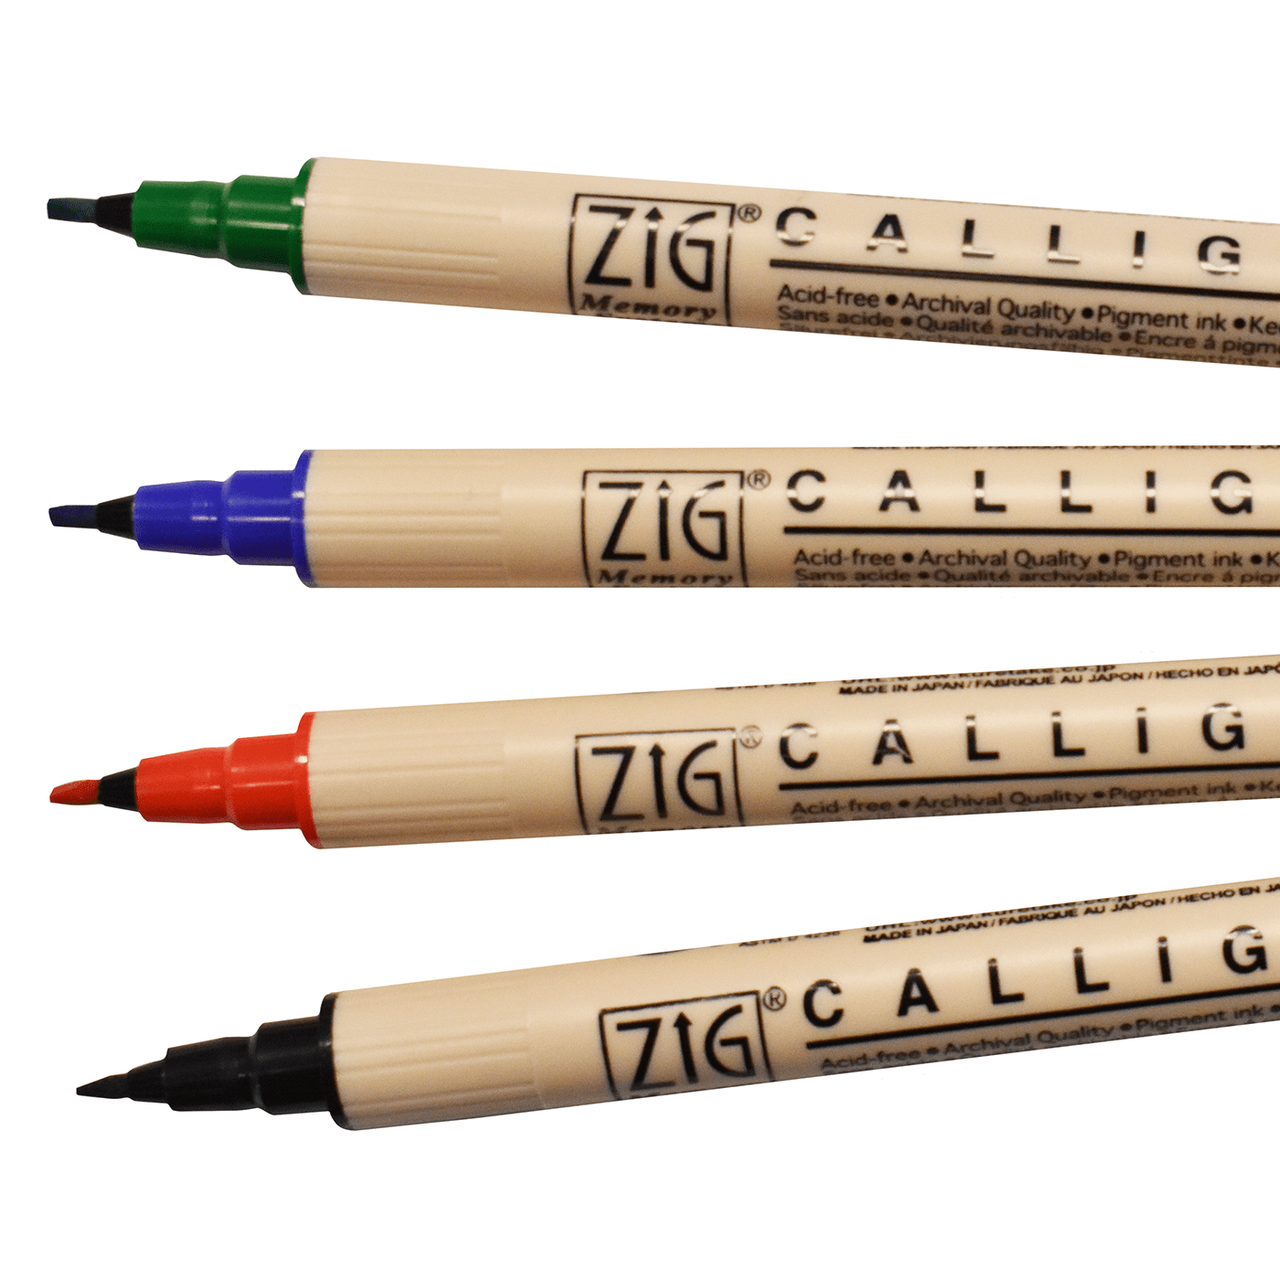 https://cdn11.bigcommerce.com/s-76f8tigafr/images/stencil/1280x1280/products/9638/14258/zig-memory-system-calligraphy-marker-set-of-4-3__49771.1660263383.png?c=1